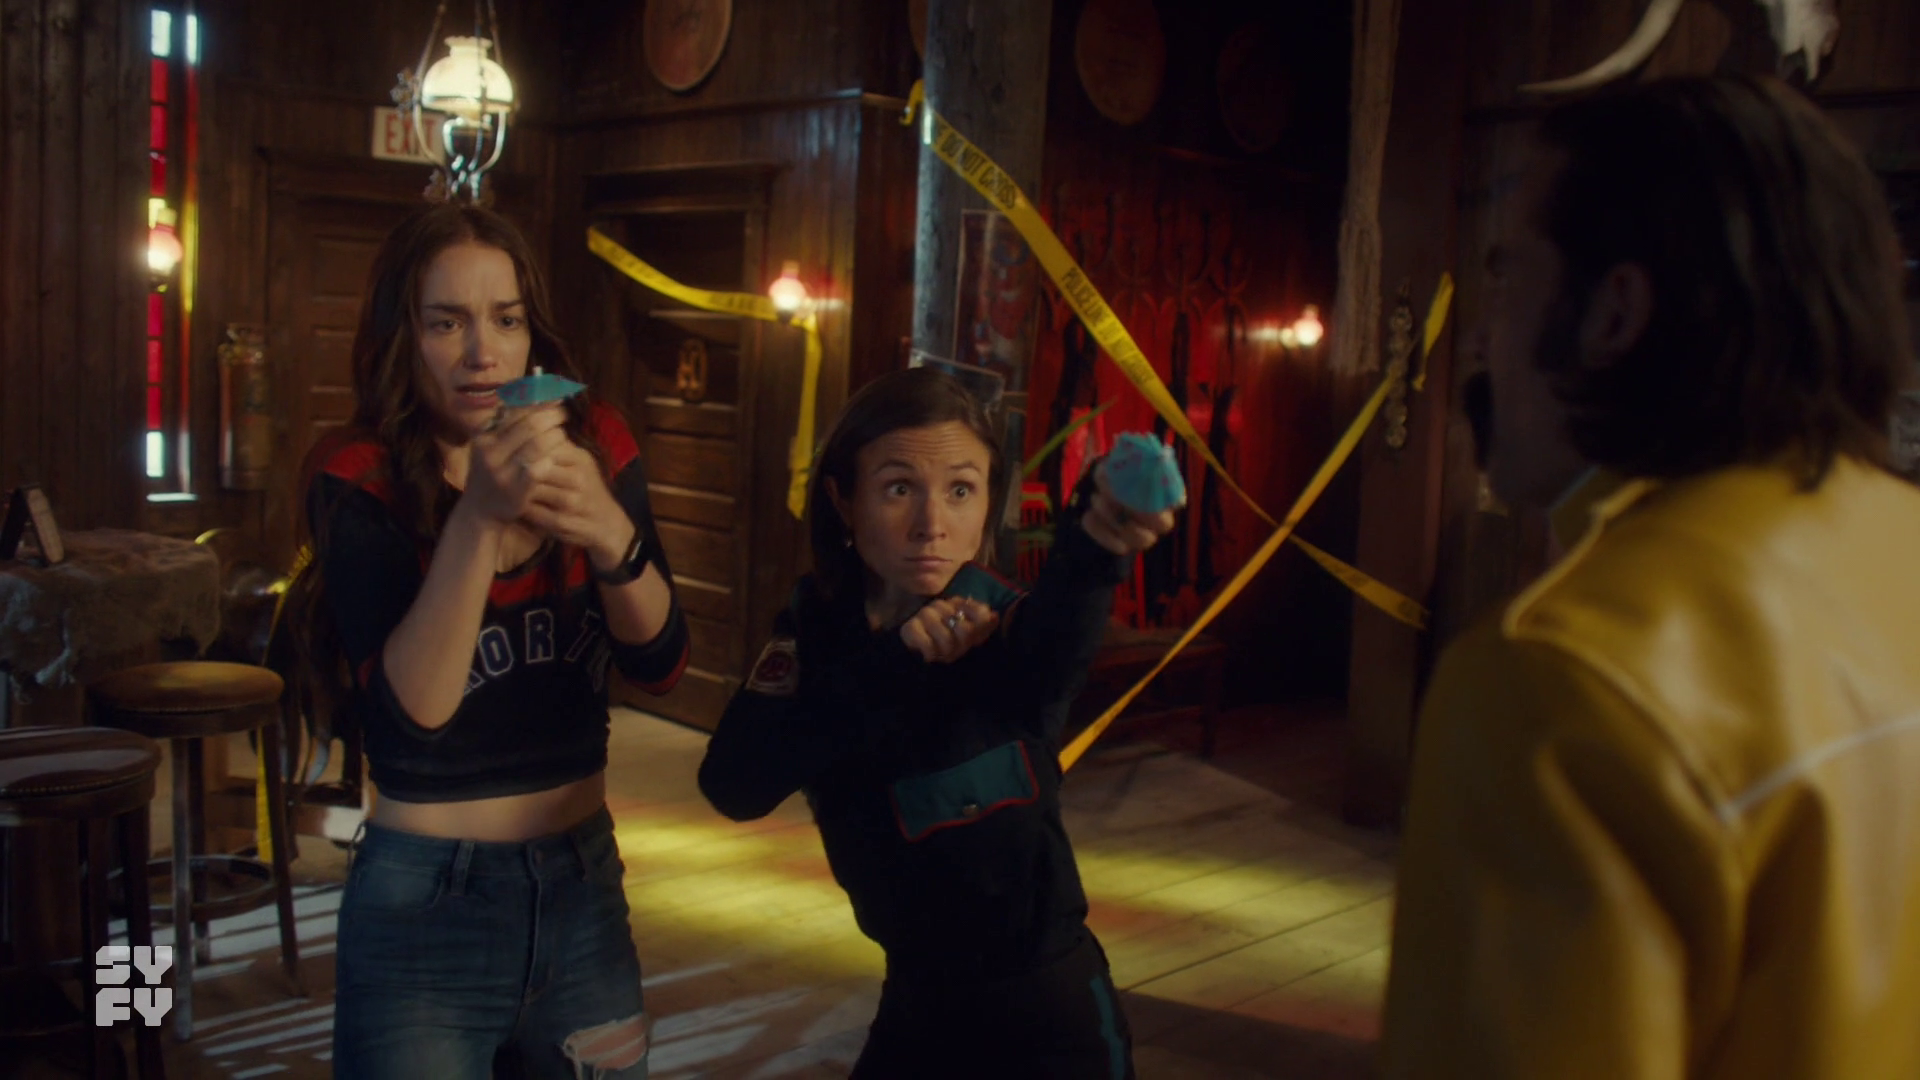 Wynonna and Waverly defending themselves with little paper umbrellas